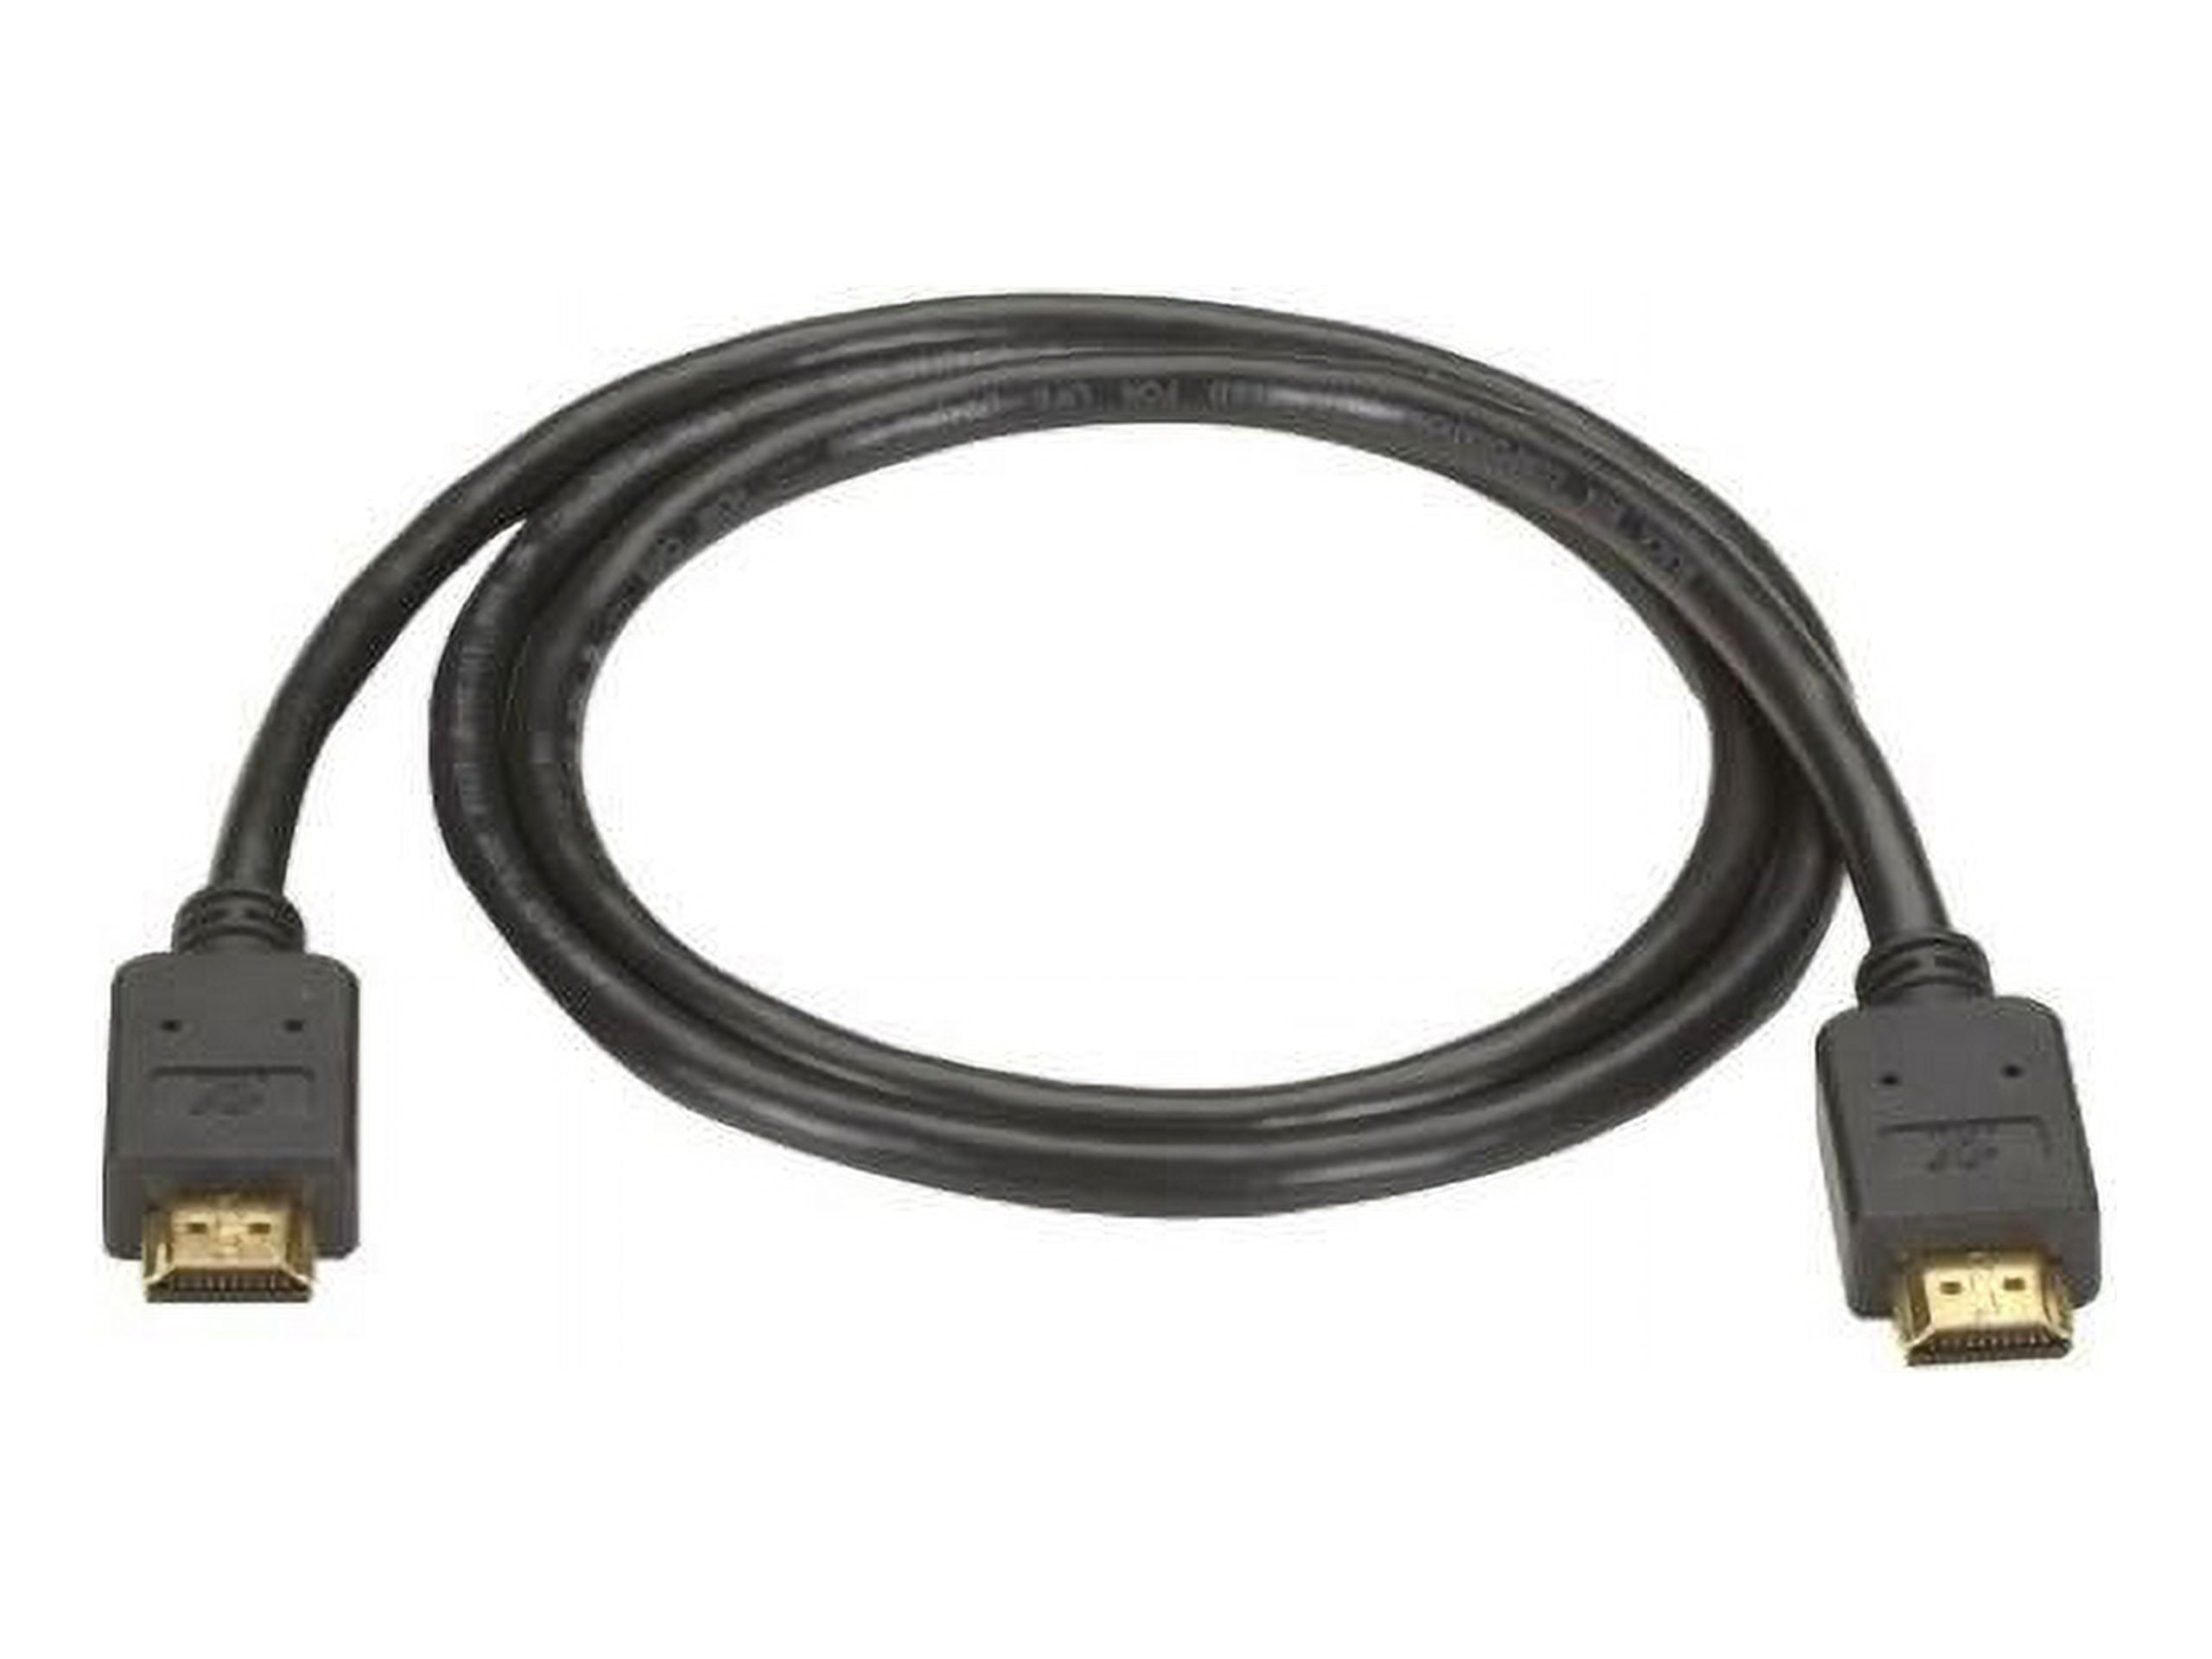 High Speed Cable Mini HDMI to HDMI Male/Male 3m Black - HDMI Cables -  Multimedia Cables - Cables and Sockets